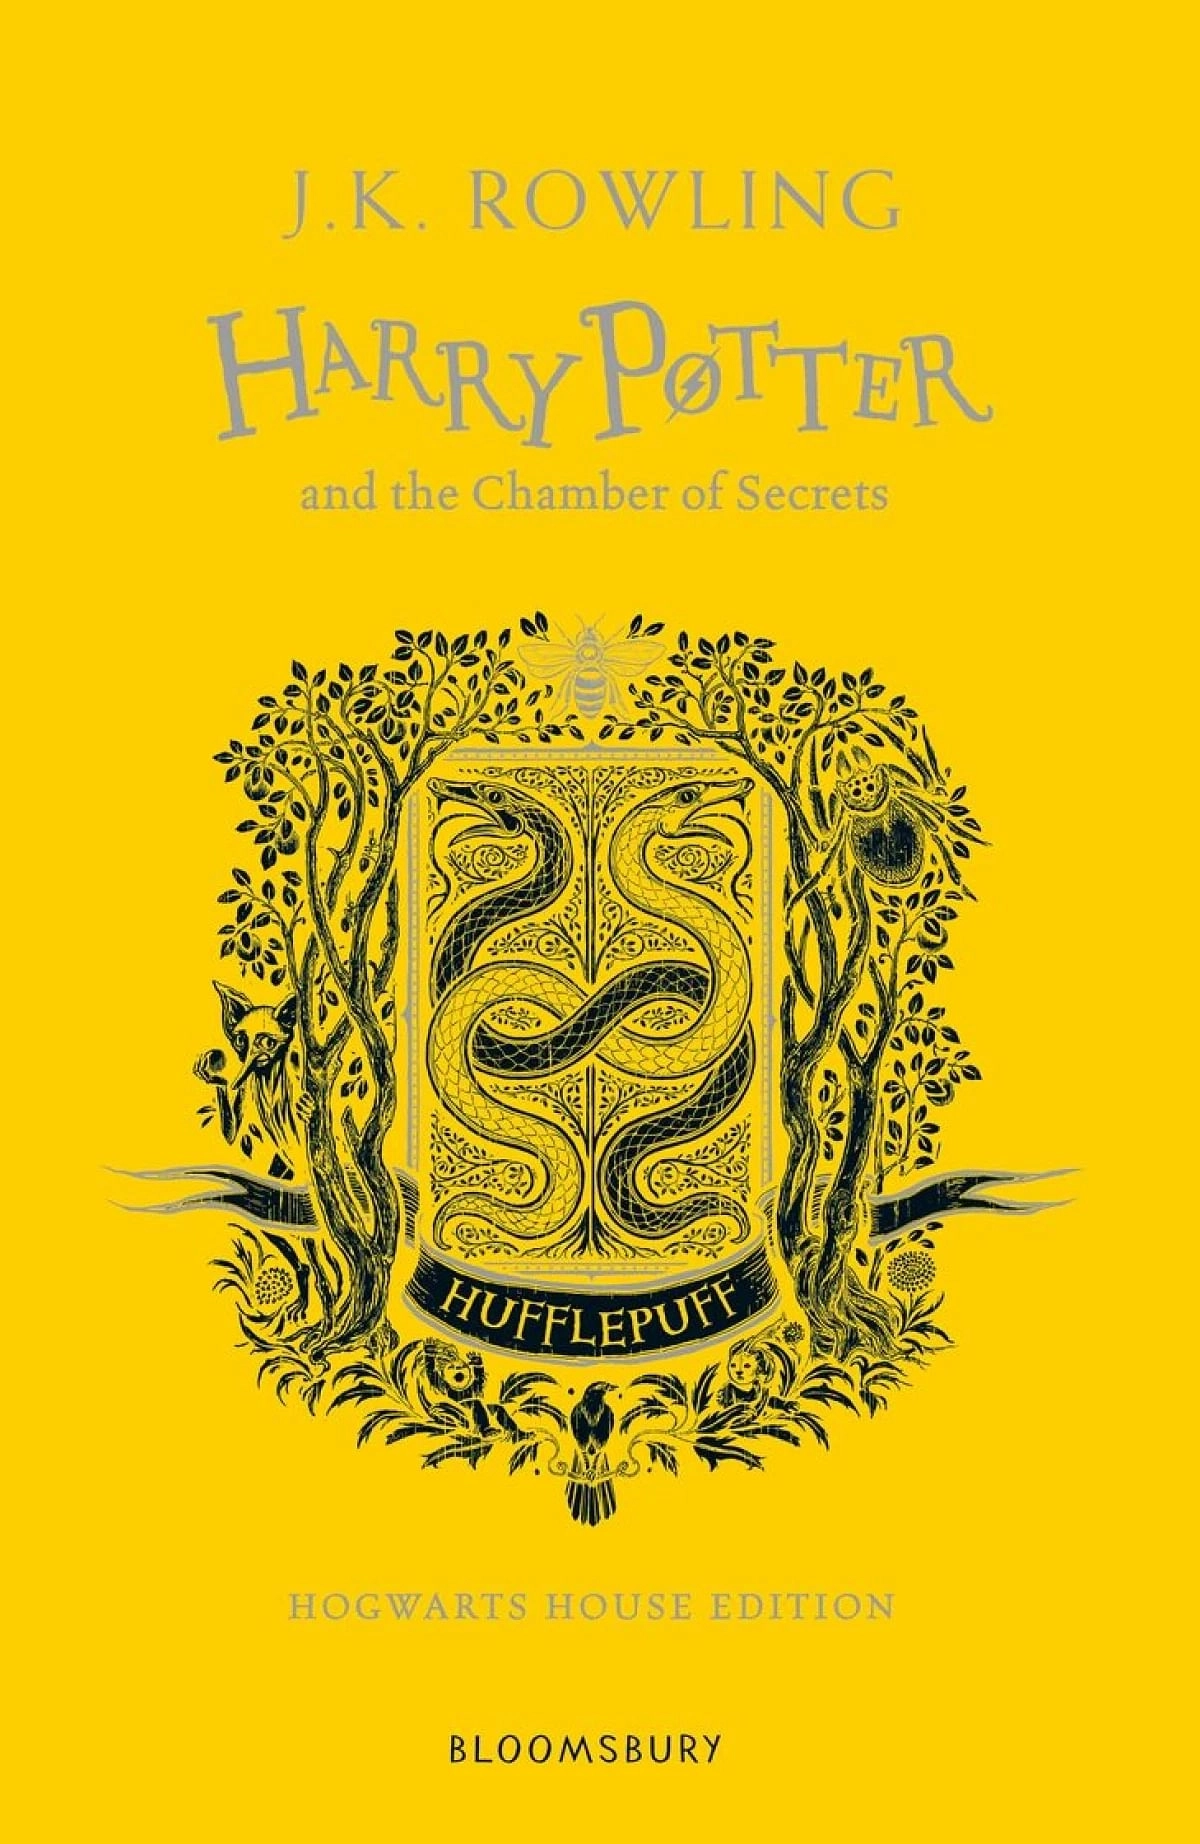 Harry Potter and the Chamber of Secrets  Hufflepuff Edition, Collectible Books For Potterheads, Story Books For Kids